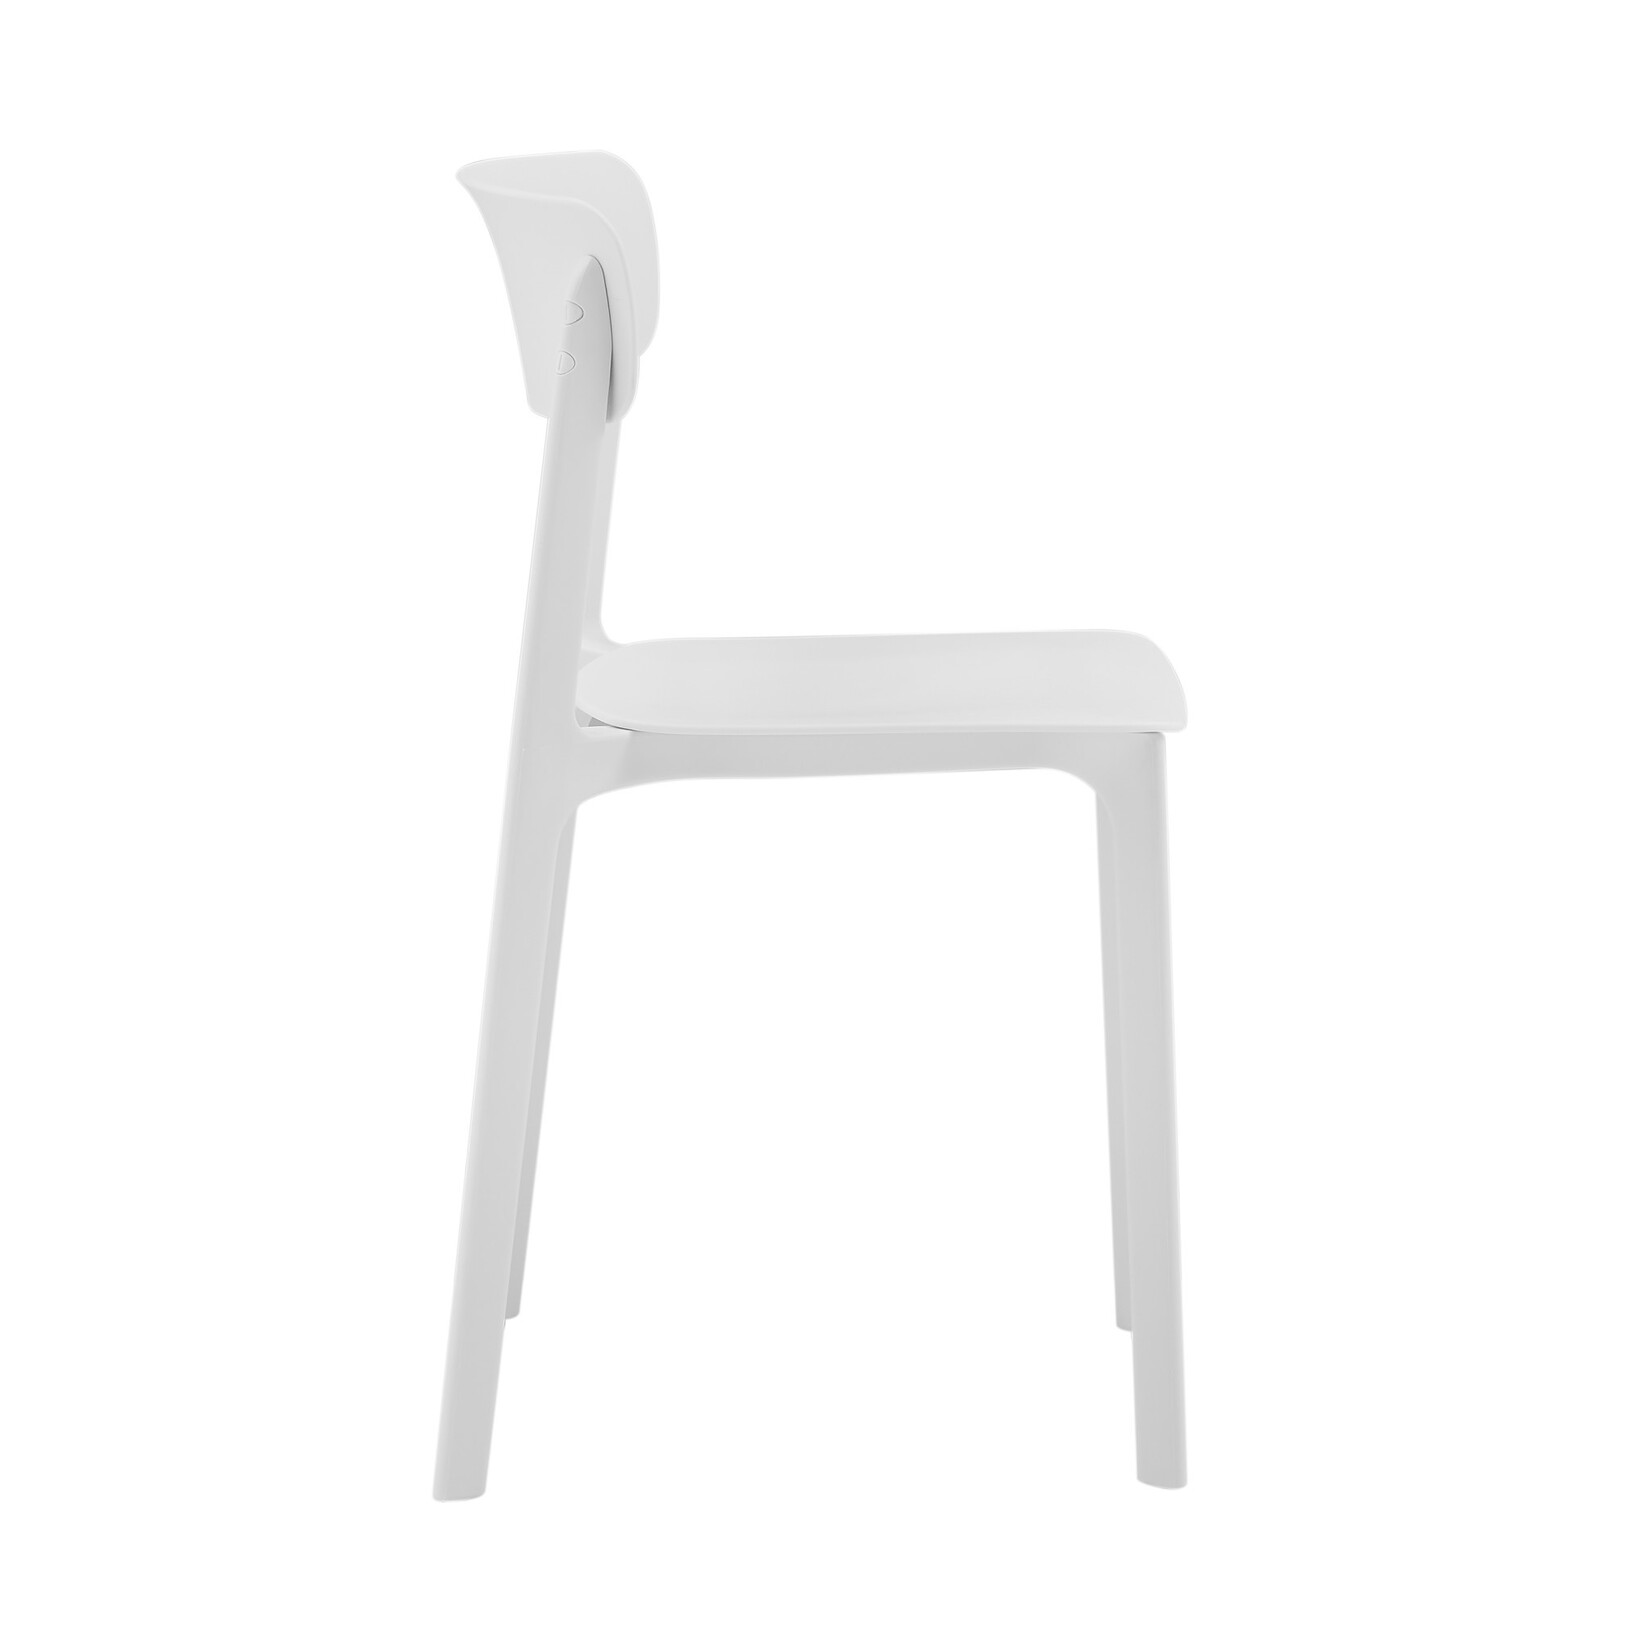 EuroStyle Tibo Indoor/Outdoor Side Chair White